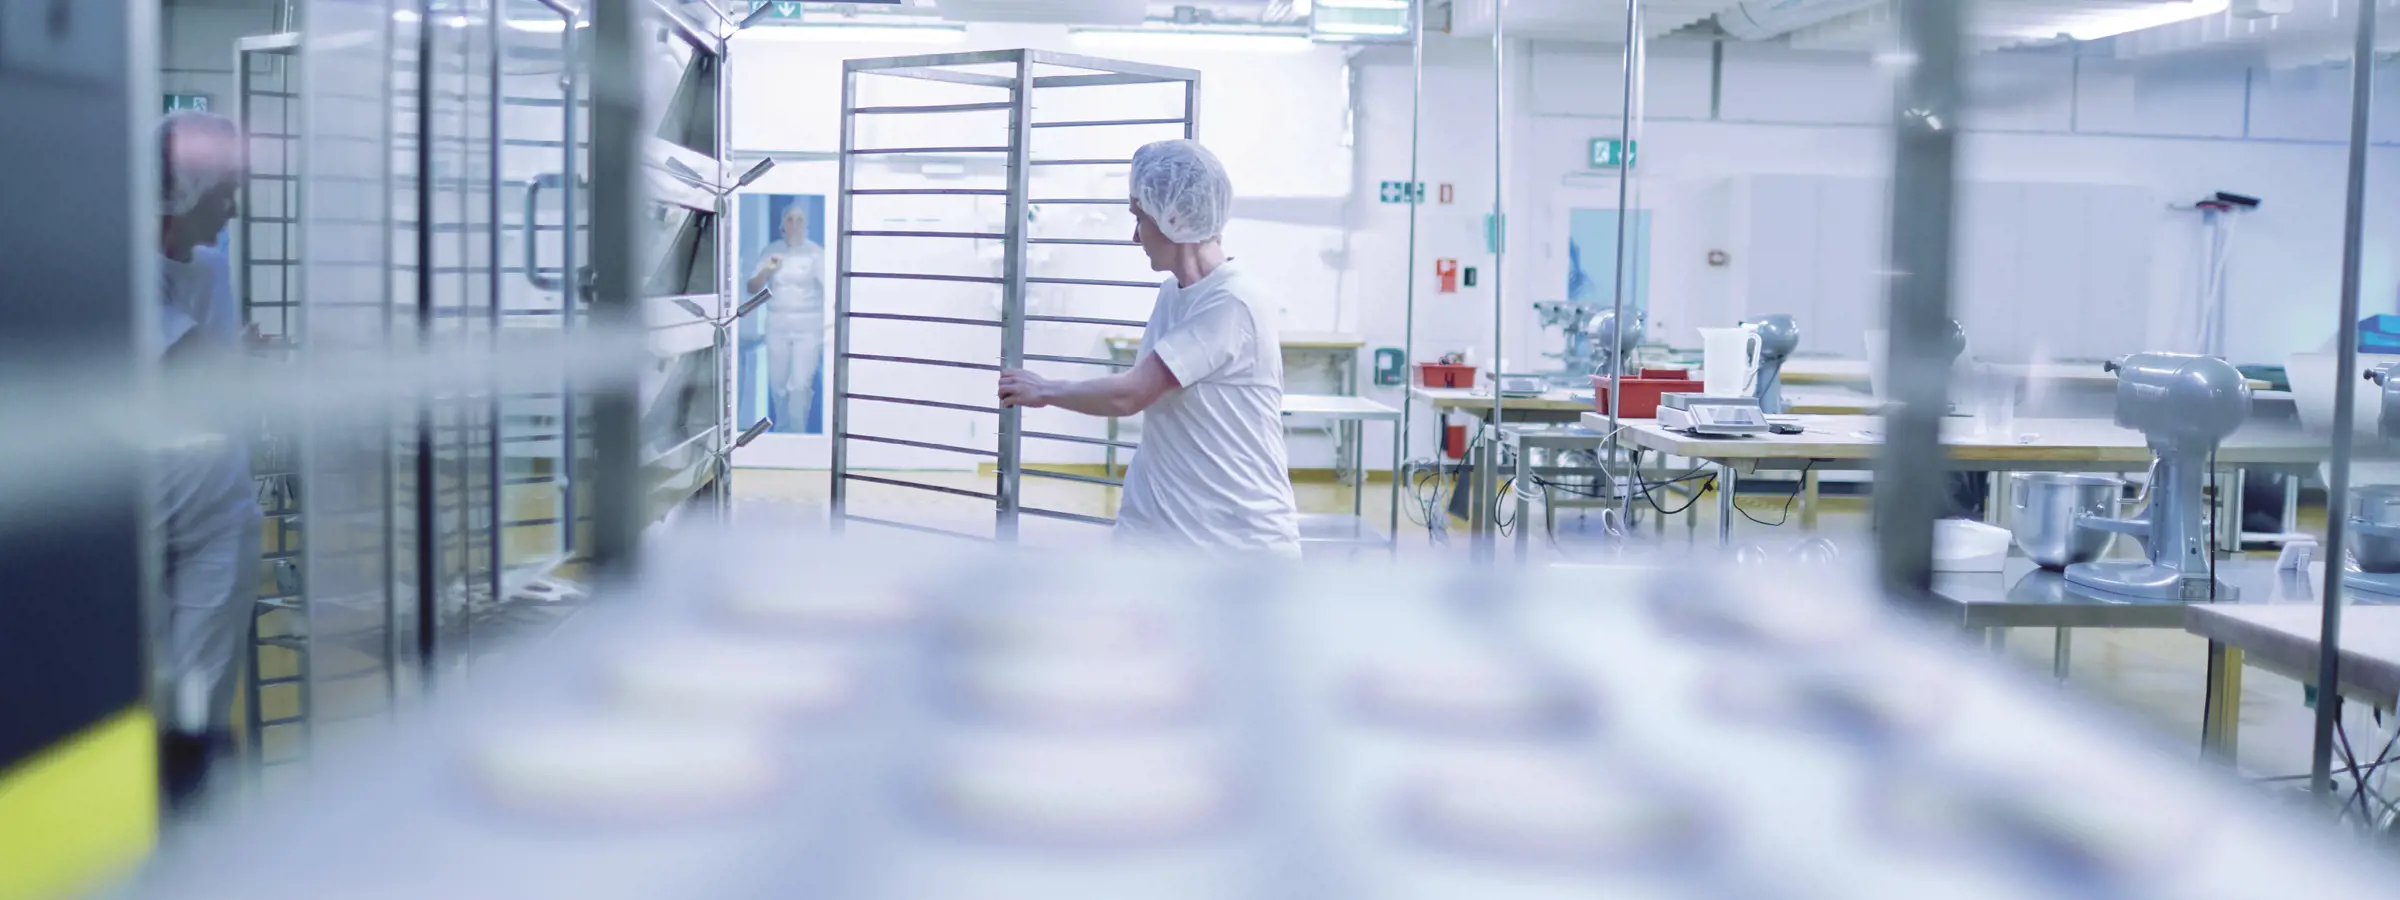 Helping bakeries to perfect or reformulate their bakery products is our passion – and our strength